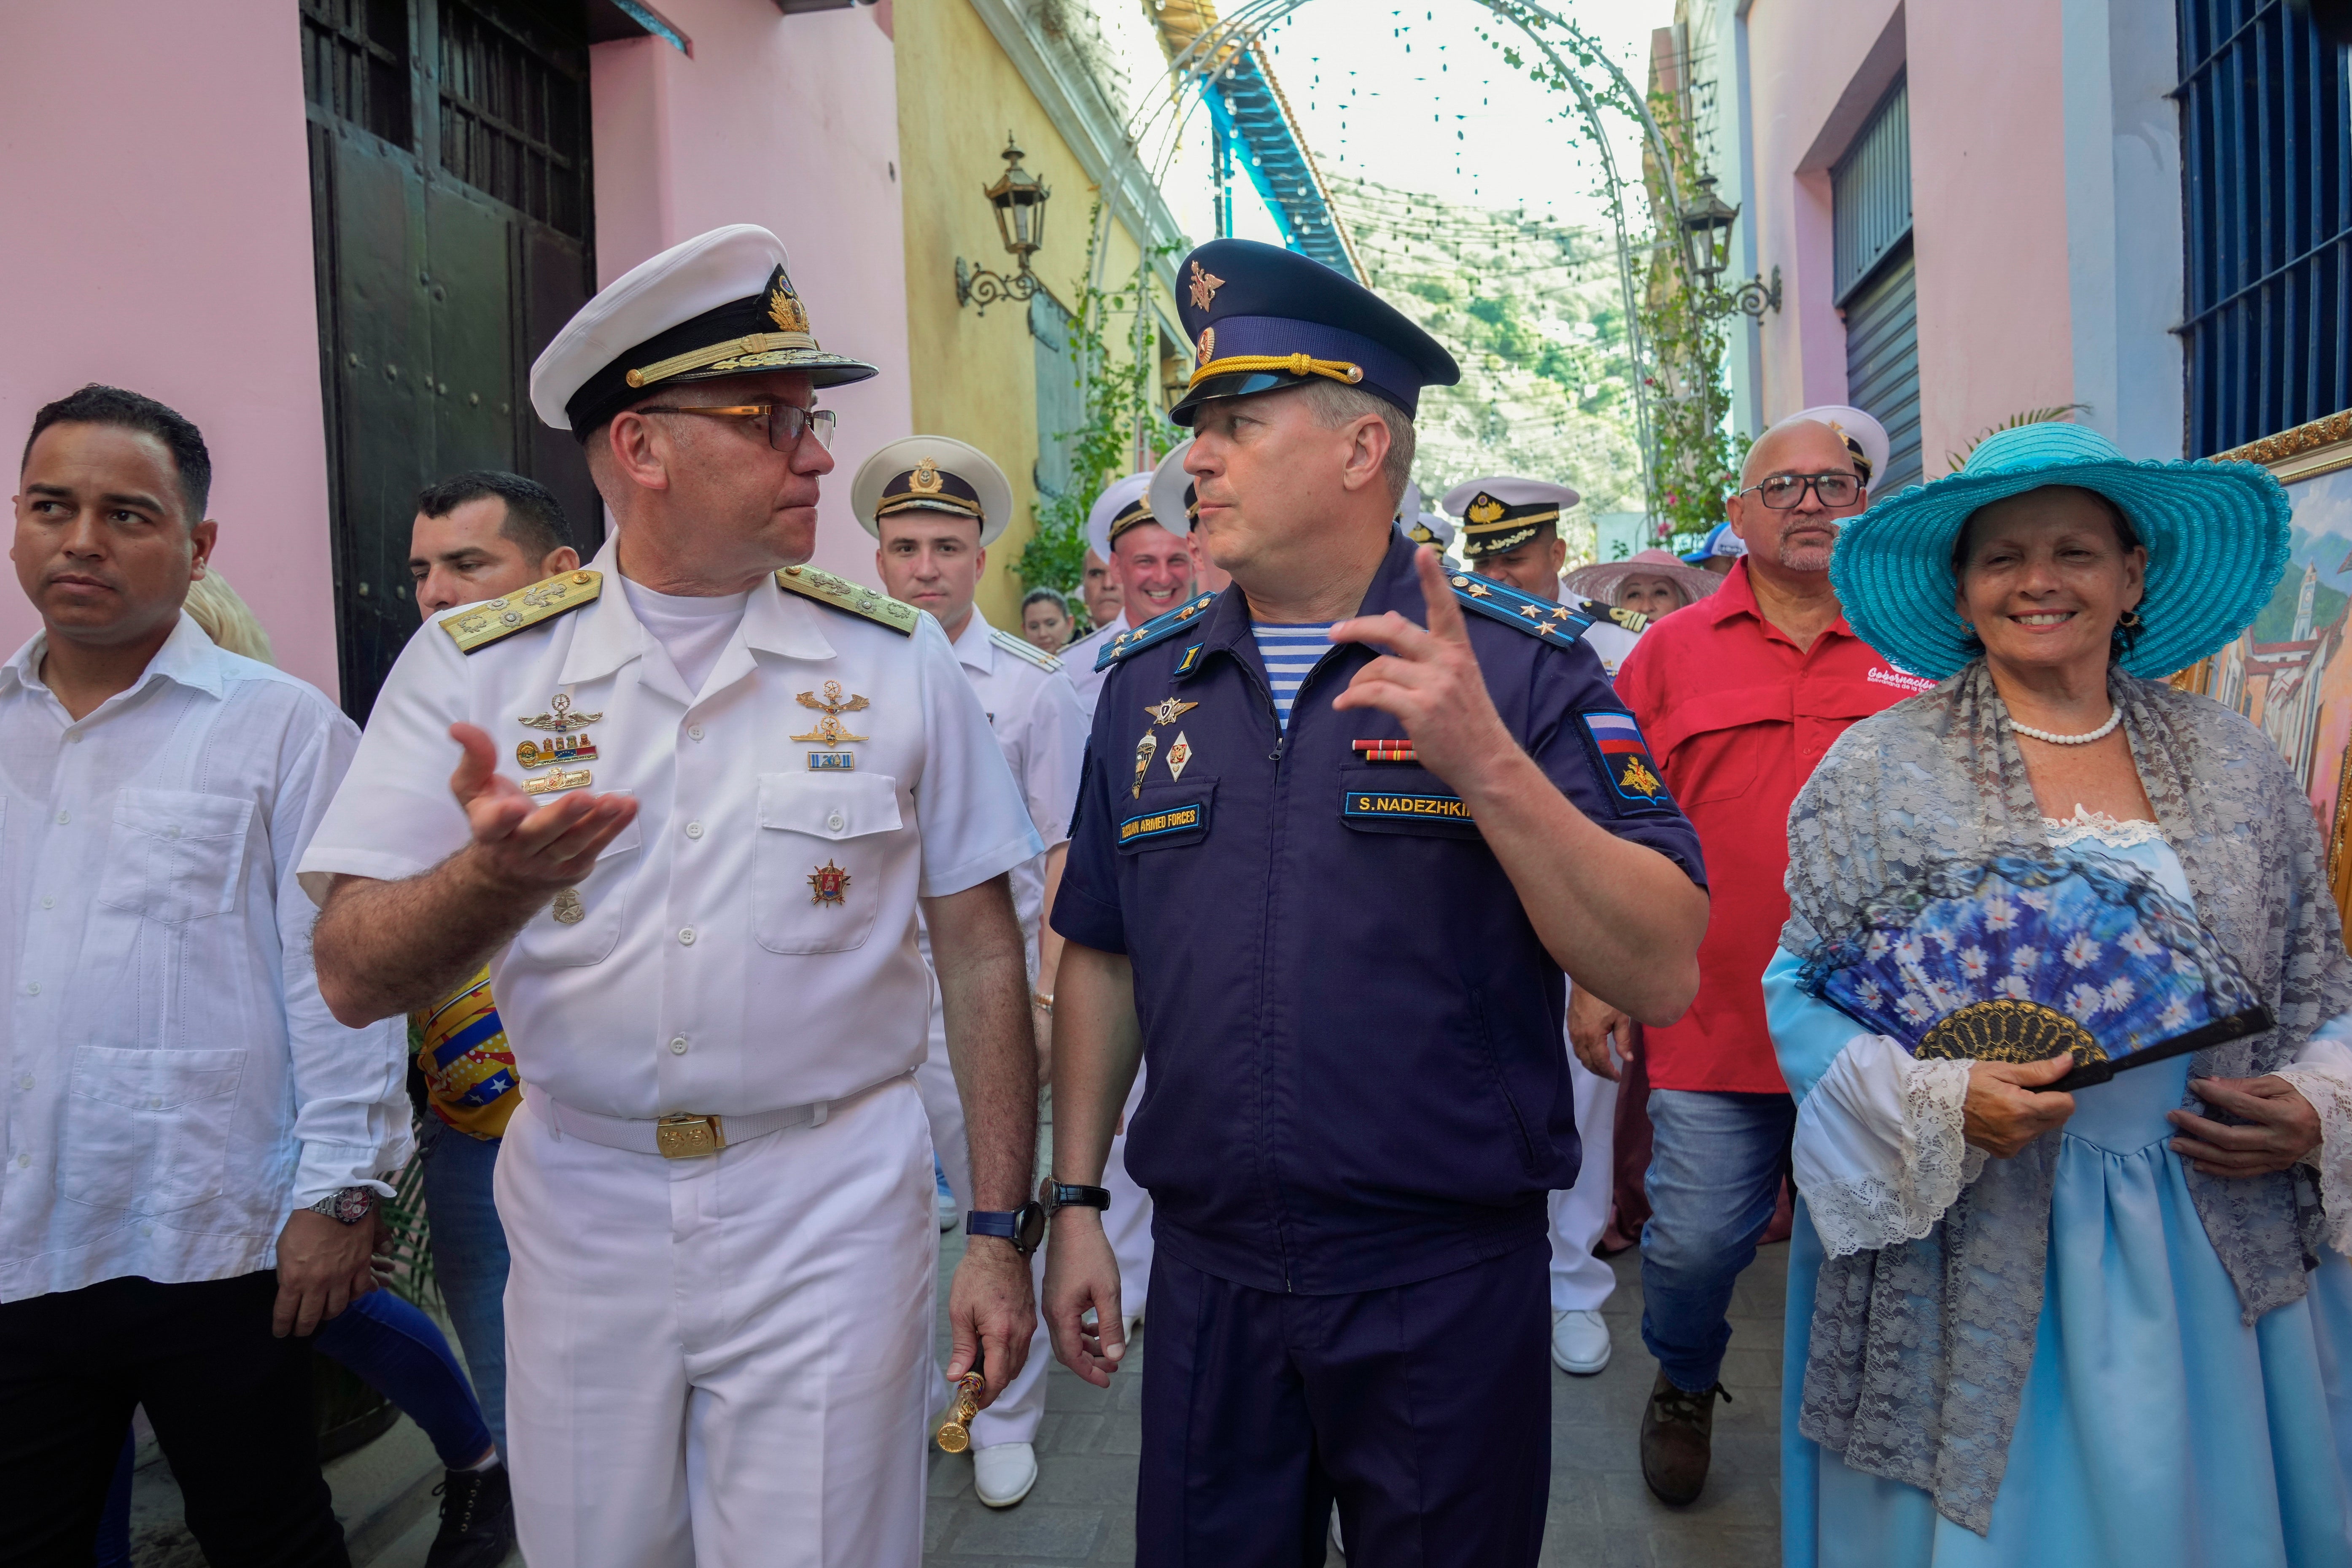 Venezuelan Vice Adm. Edward Centeno Mass, left, speaks with a member of the Russian Armed Forces during a welcoming tour